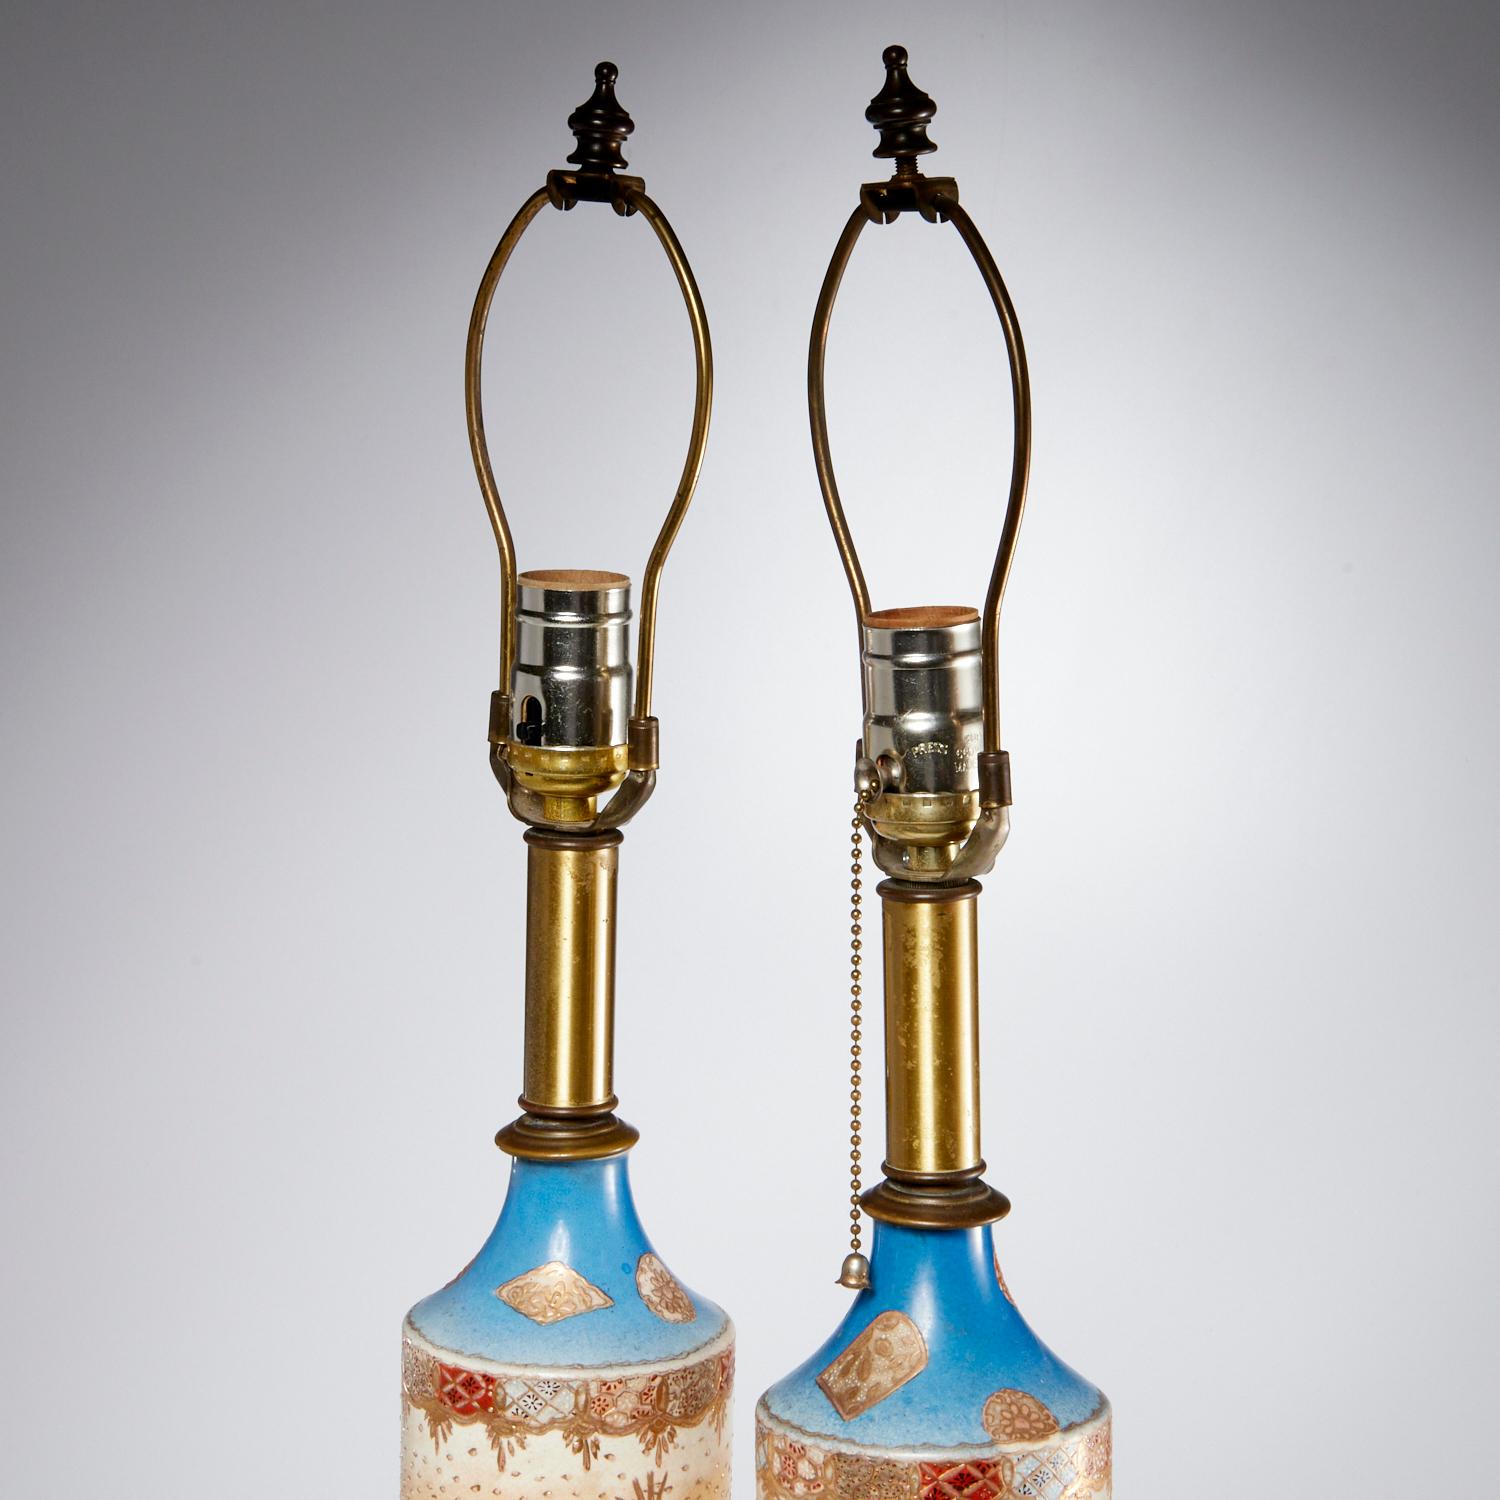 Late 19th pair of Japanese Satsuma vase table lamps, decorated with Japanese warriors., with floral and gold accents. Possibly Meiji period. This pair of columnar lamps, with a brass base, socket and harp, has an overall attractive appearance.